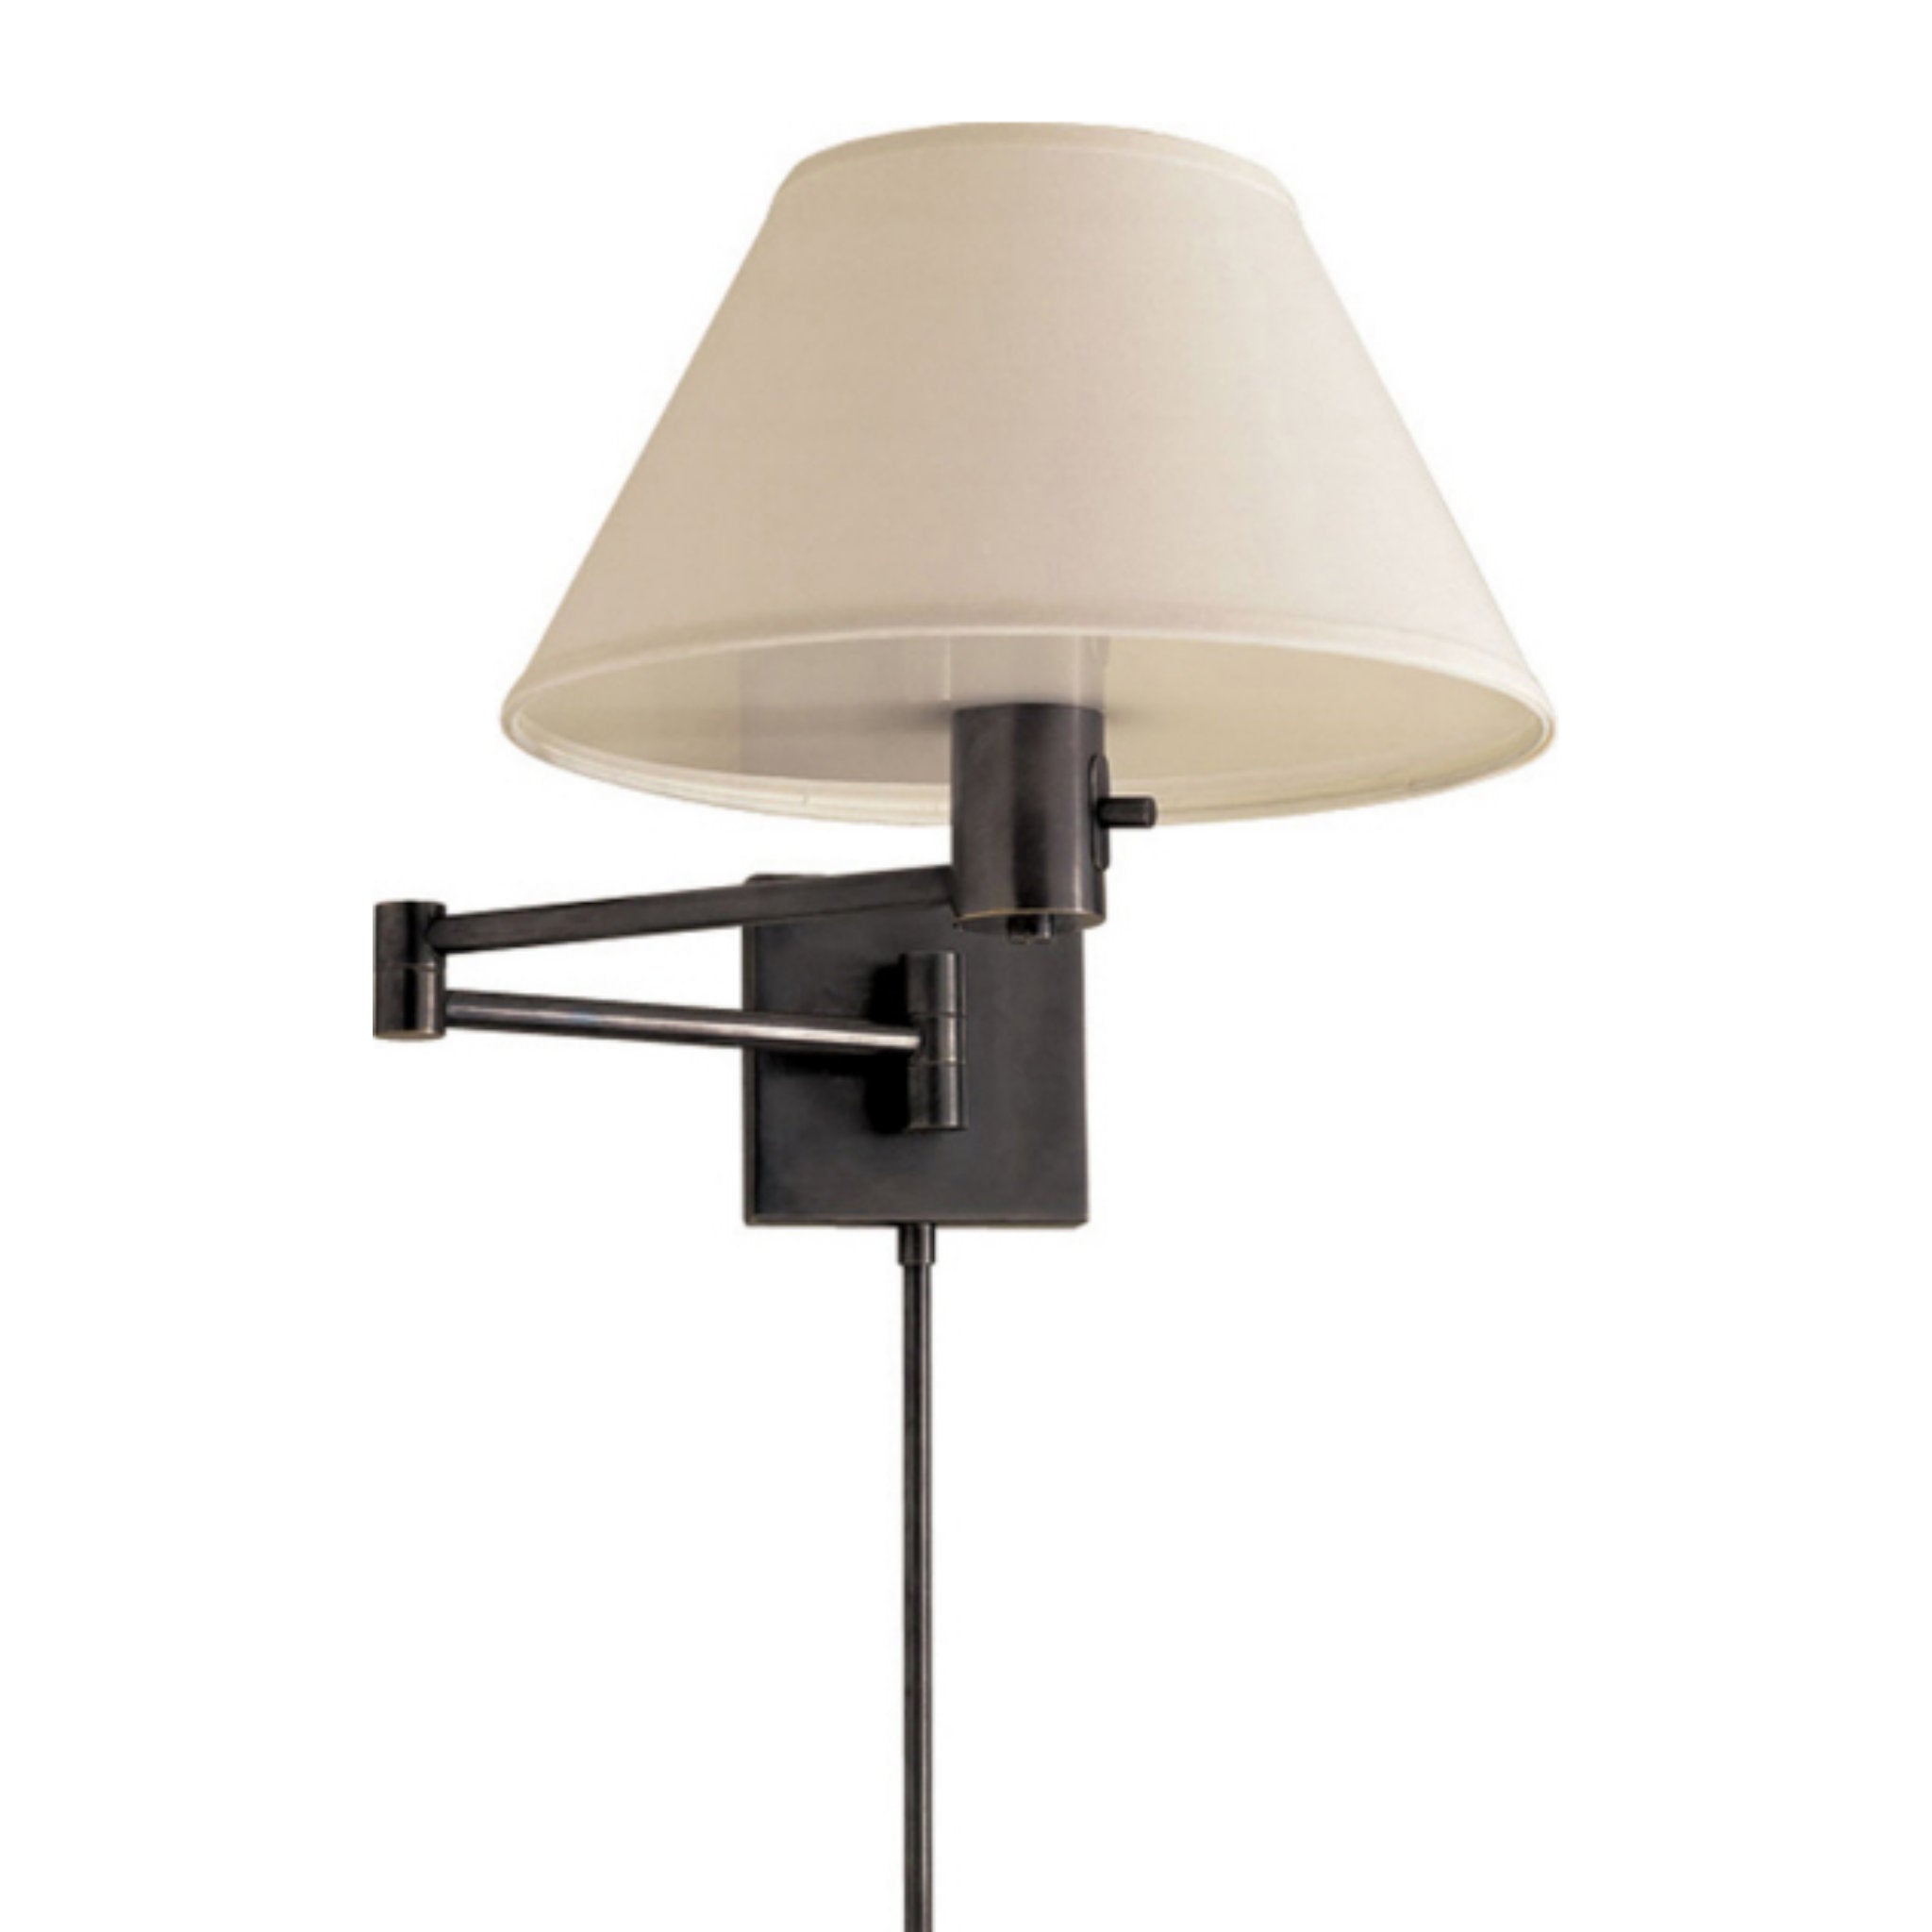 Studio VC Classic Swing Arm Wall Lamp in Bronze with Linen Shade Open Box